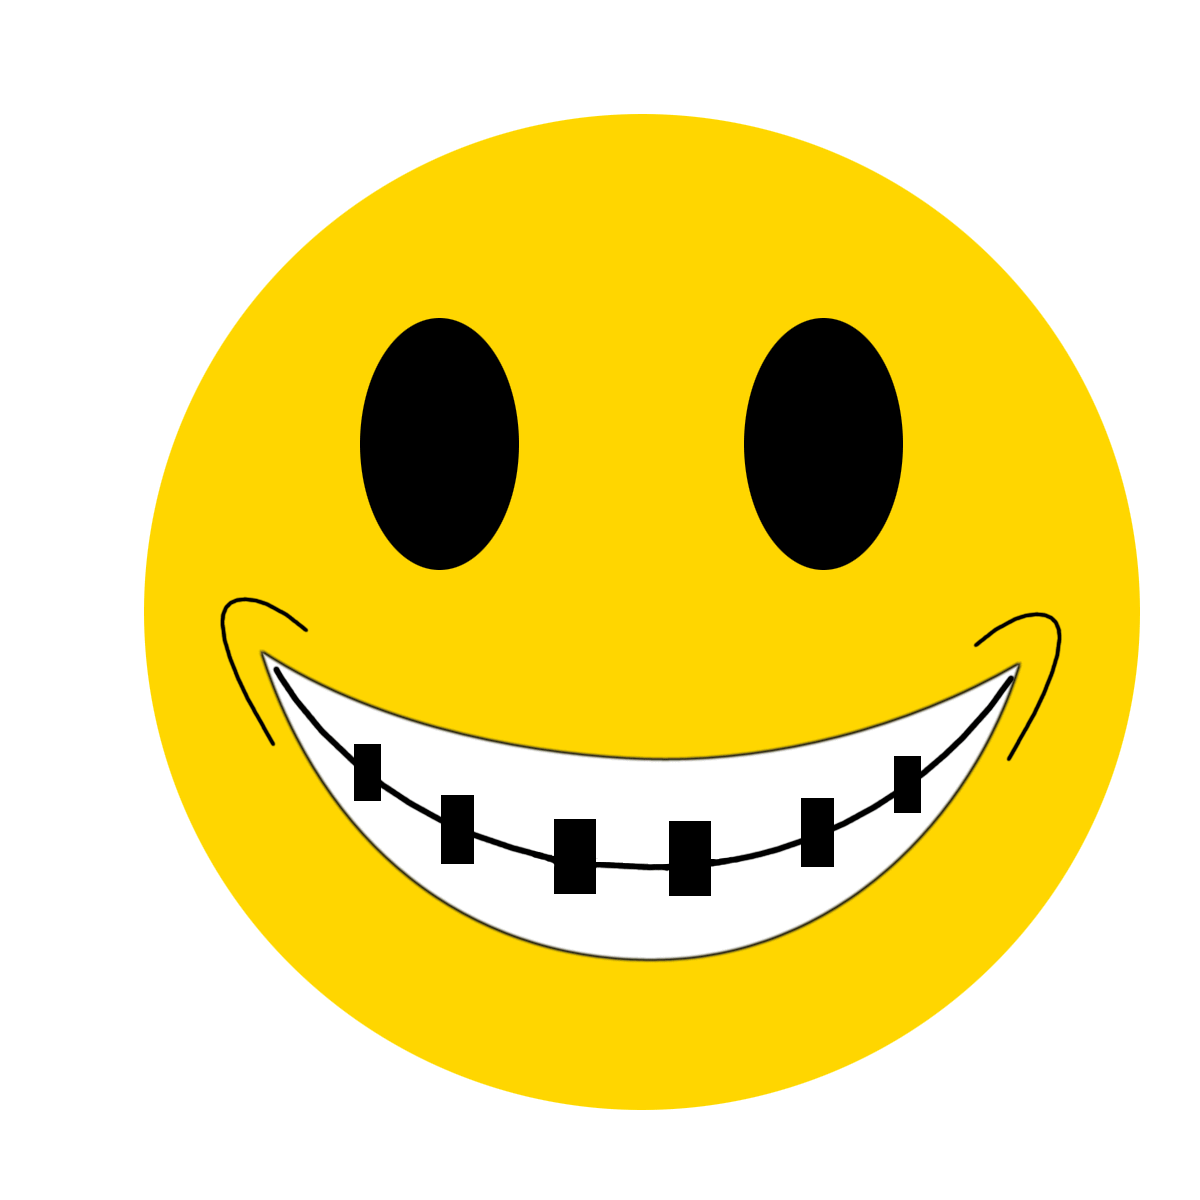 Cool Smiley Faces - ClipArt Best